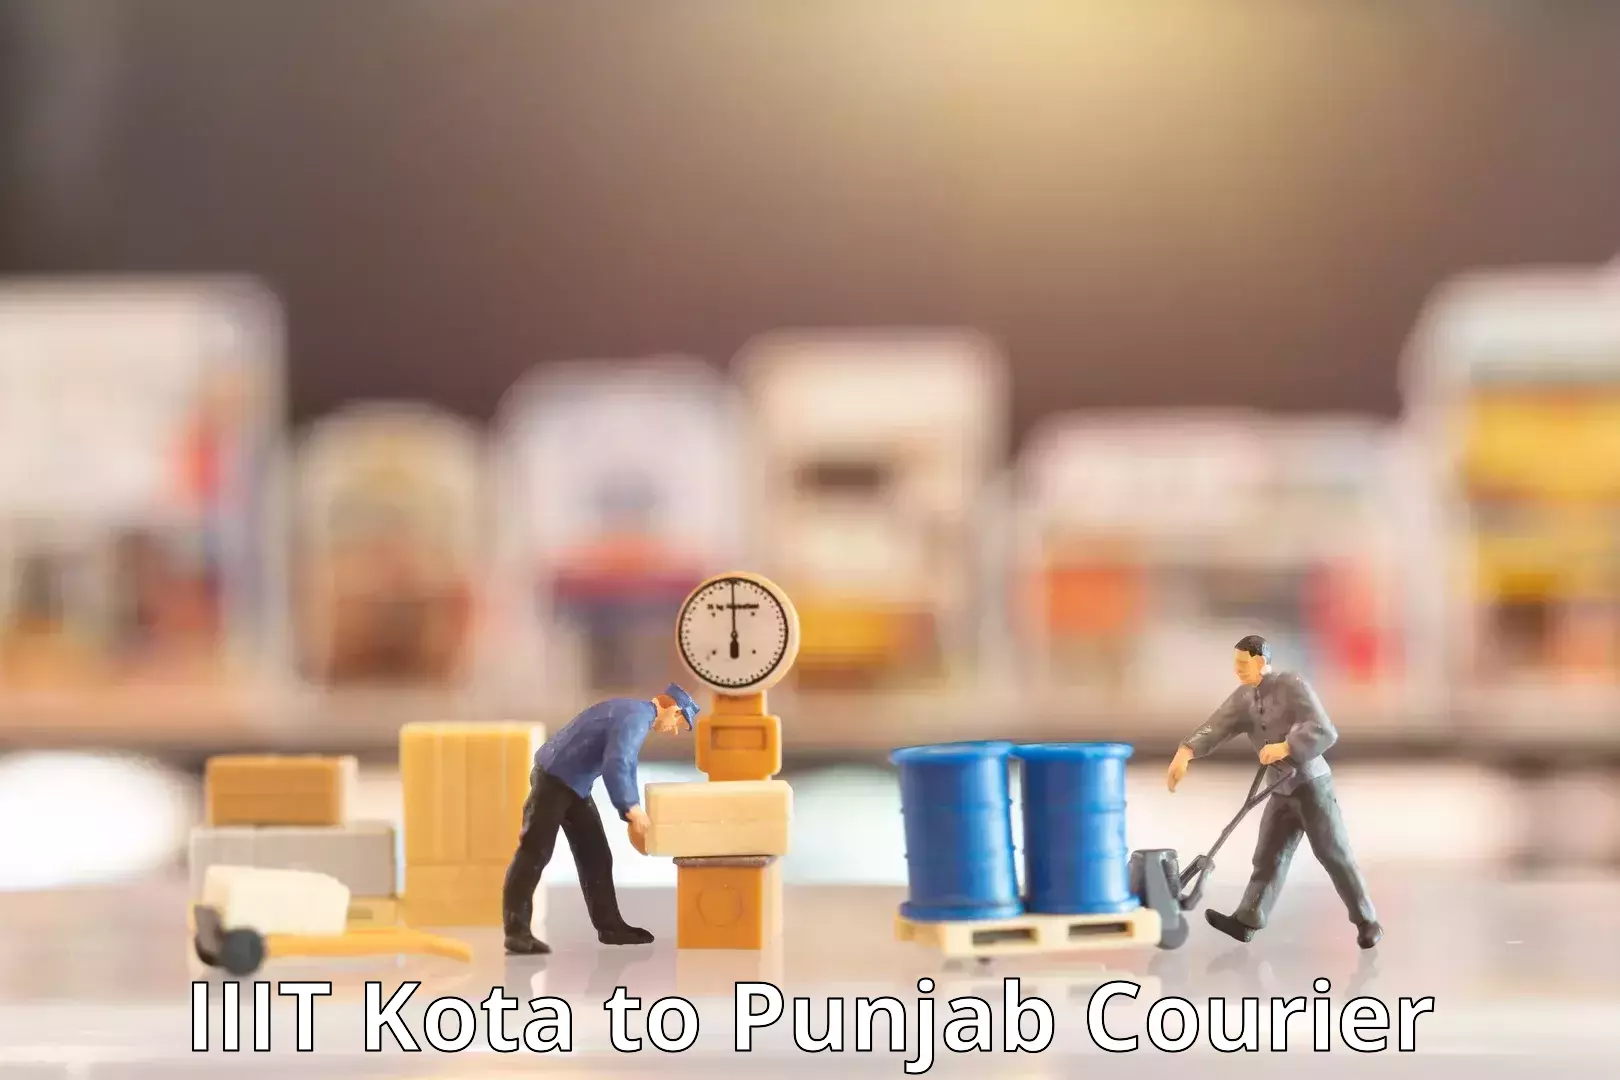 Courier rate comparison in IIIT Kota to Patiala